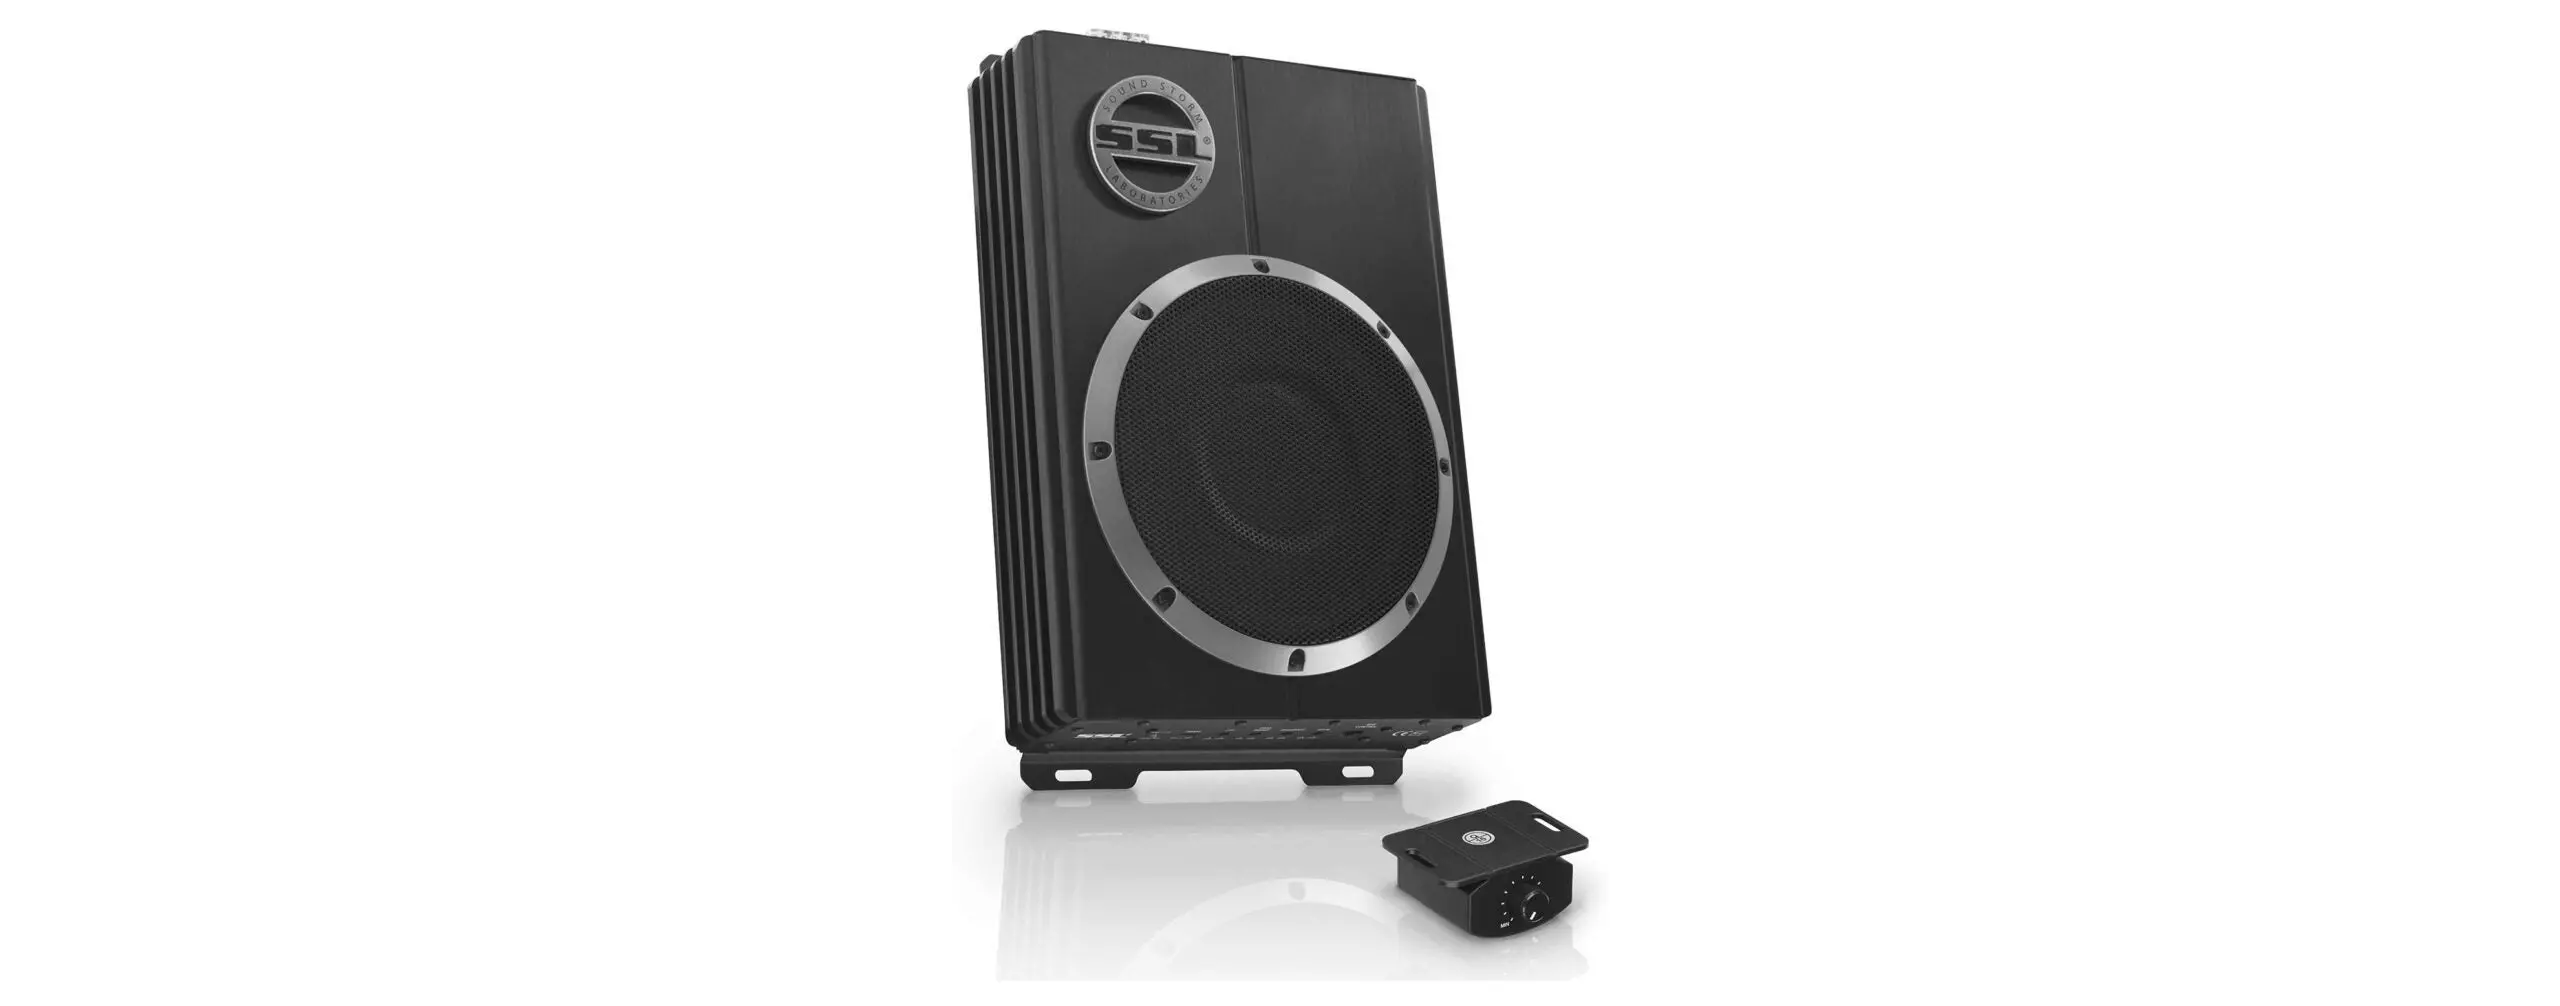 The Best Car Speakers for Bass (Review and Buying Guide) in 2022